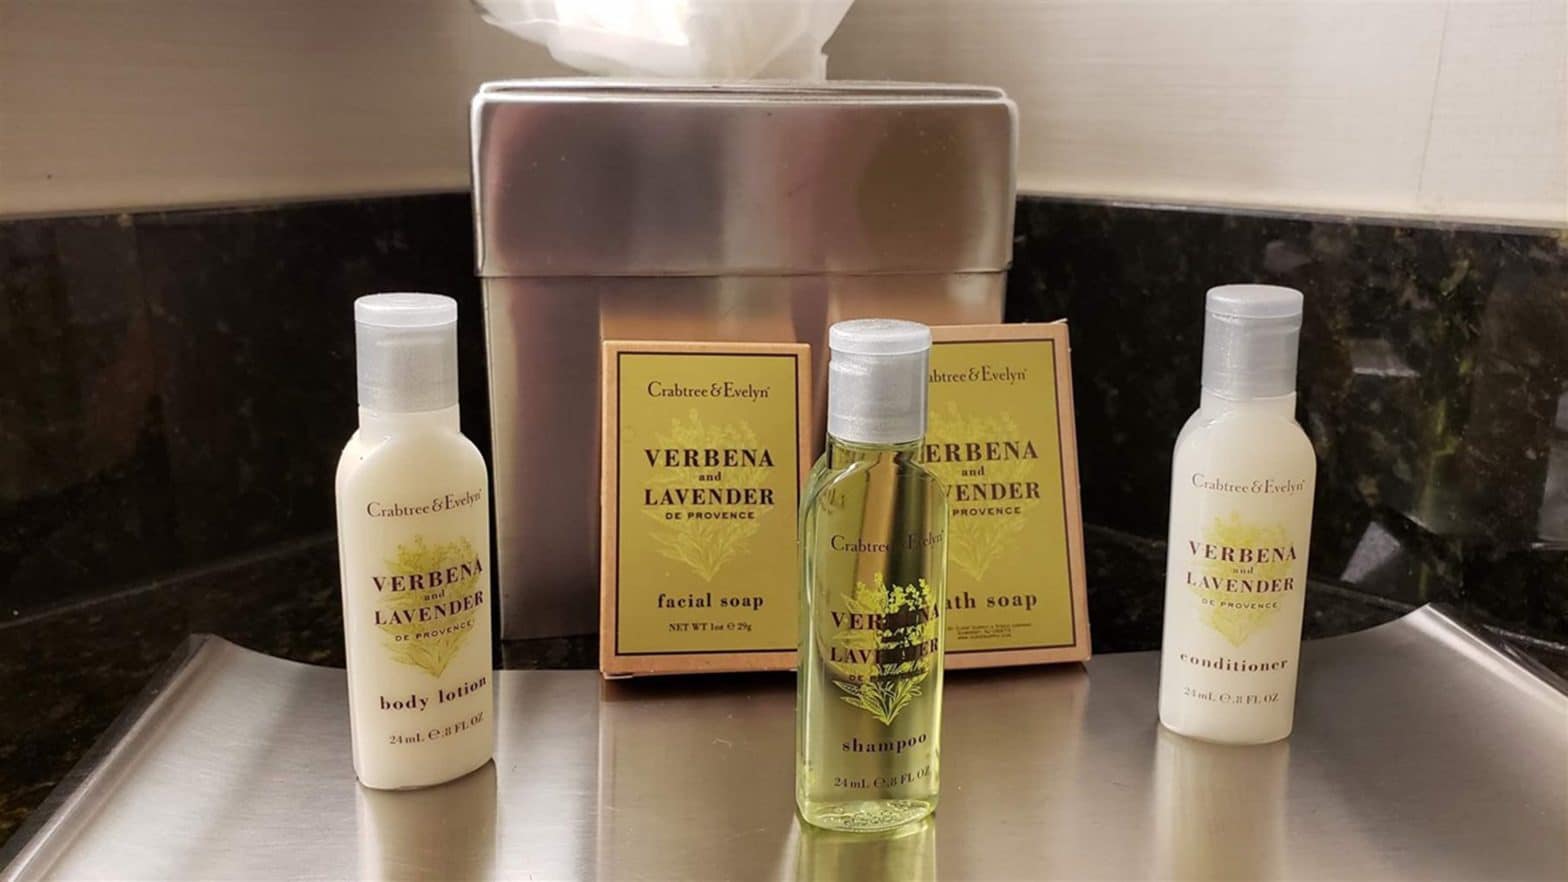 Ban on Hotel Toiletries Is Latest Effort to Curb Plastic Waste